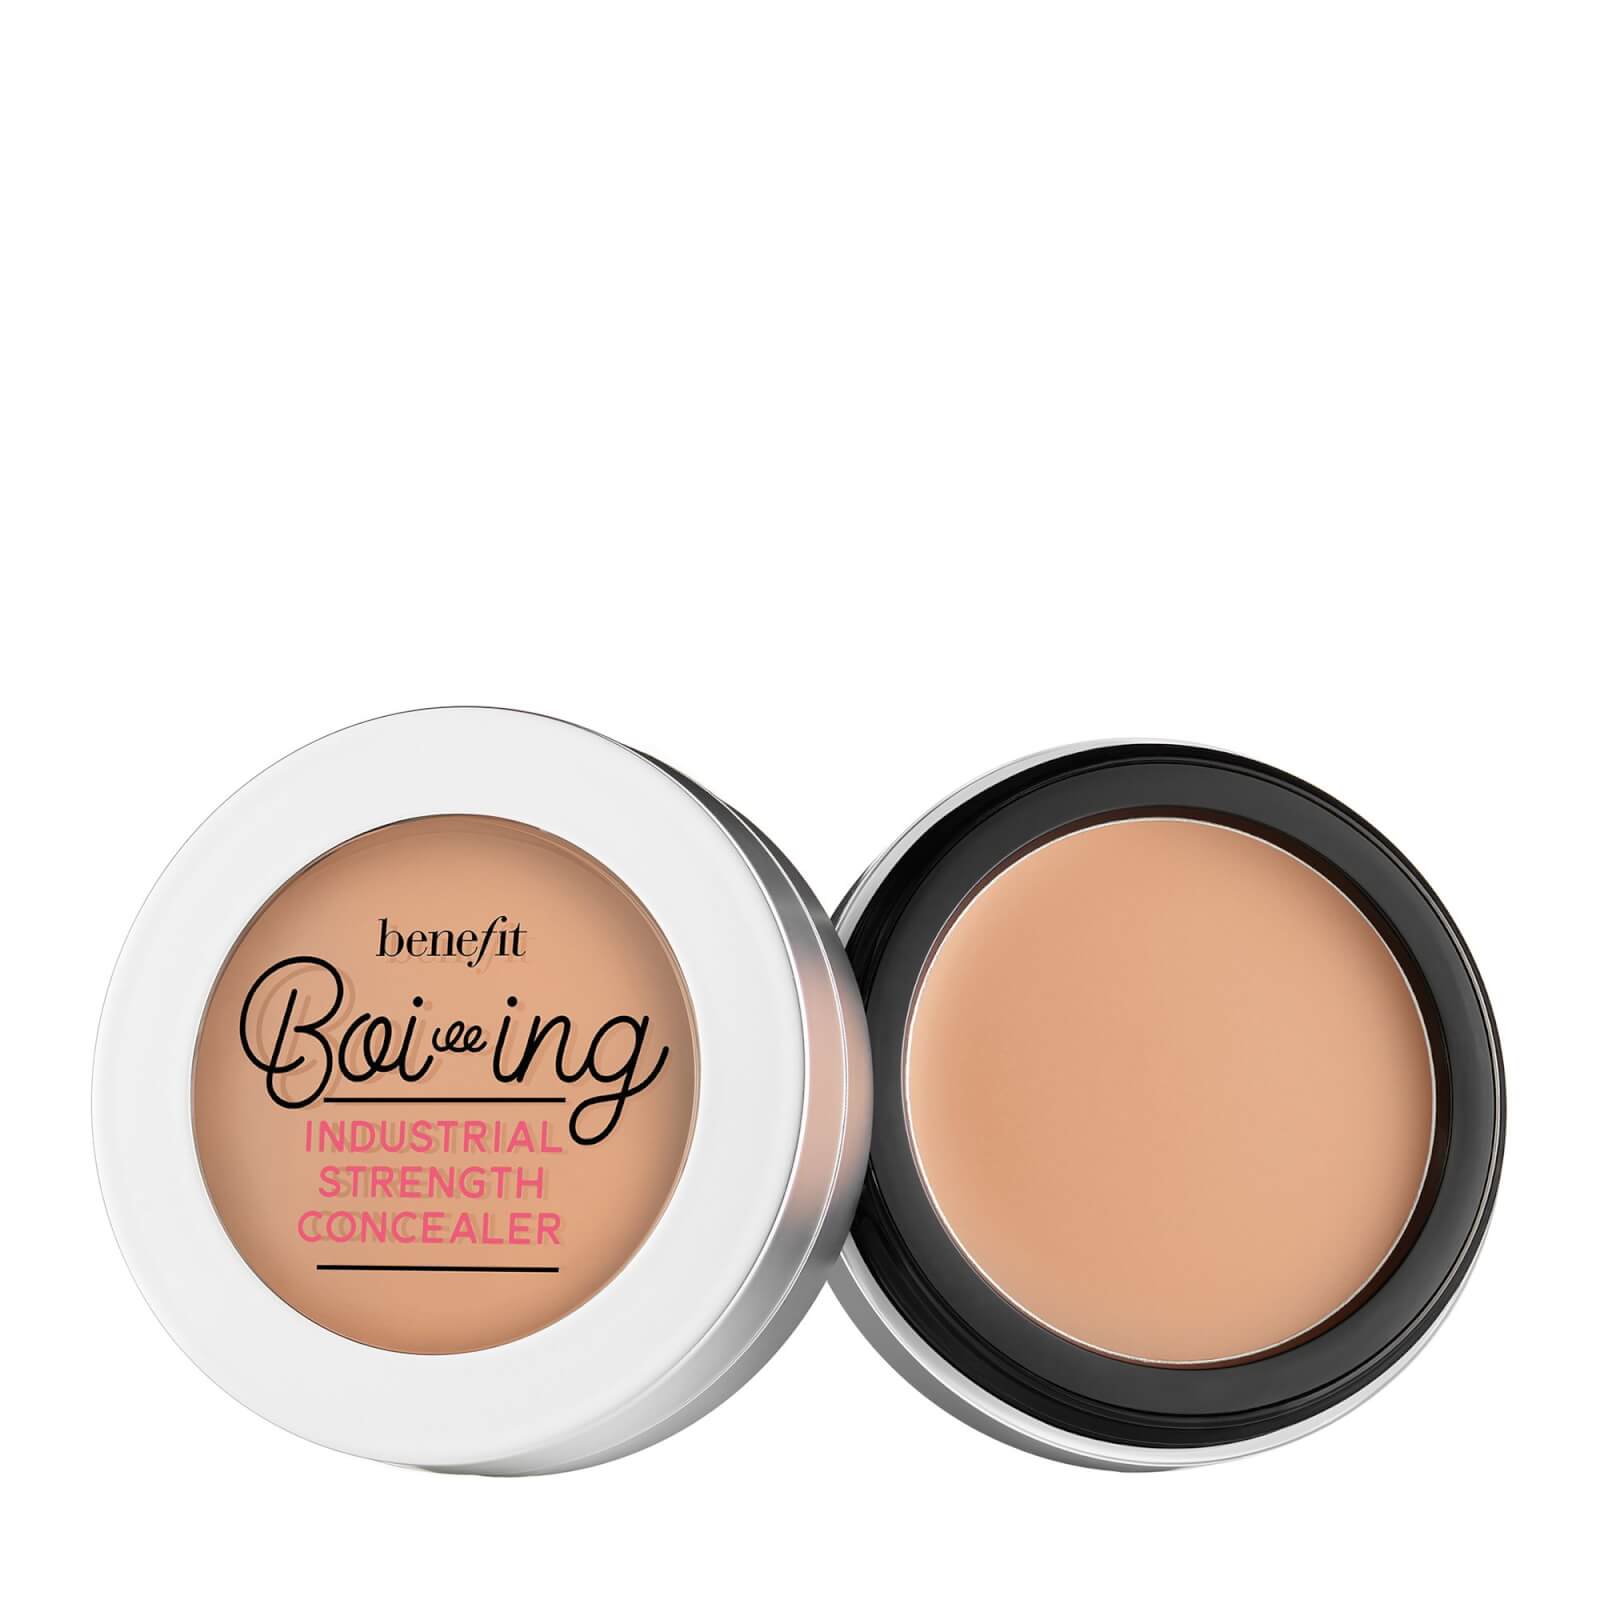 benefit Boi-ing Industrial Strength Concealer 3g (Various Shades) - 04